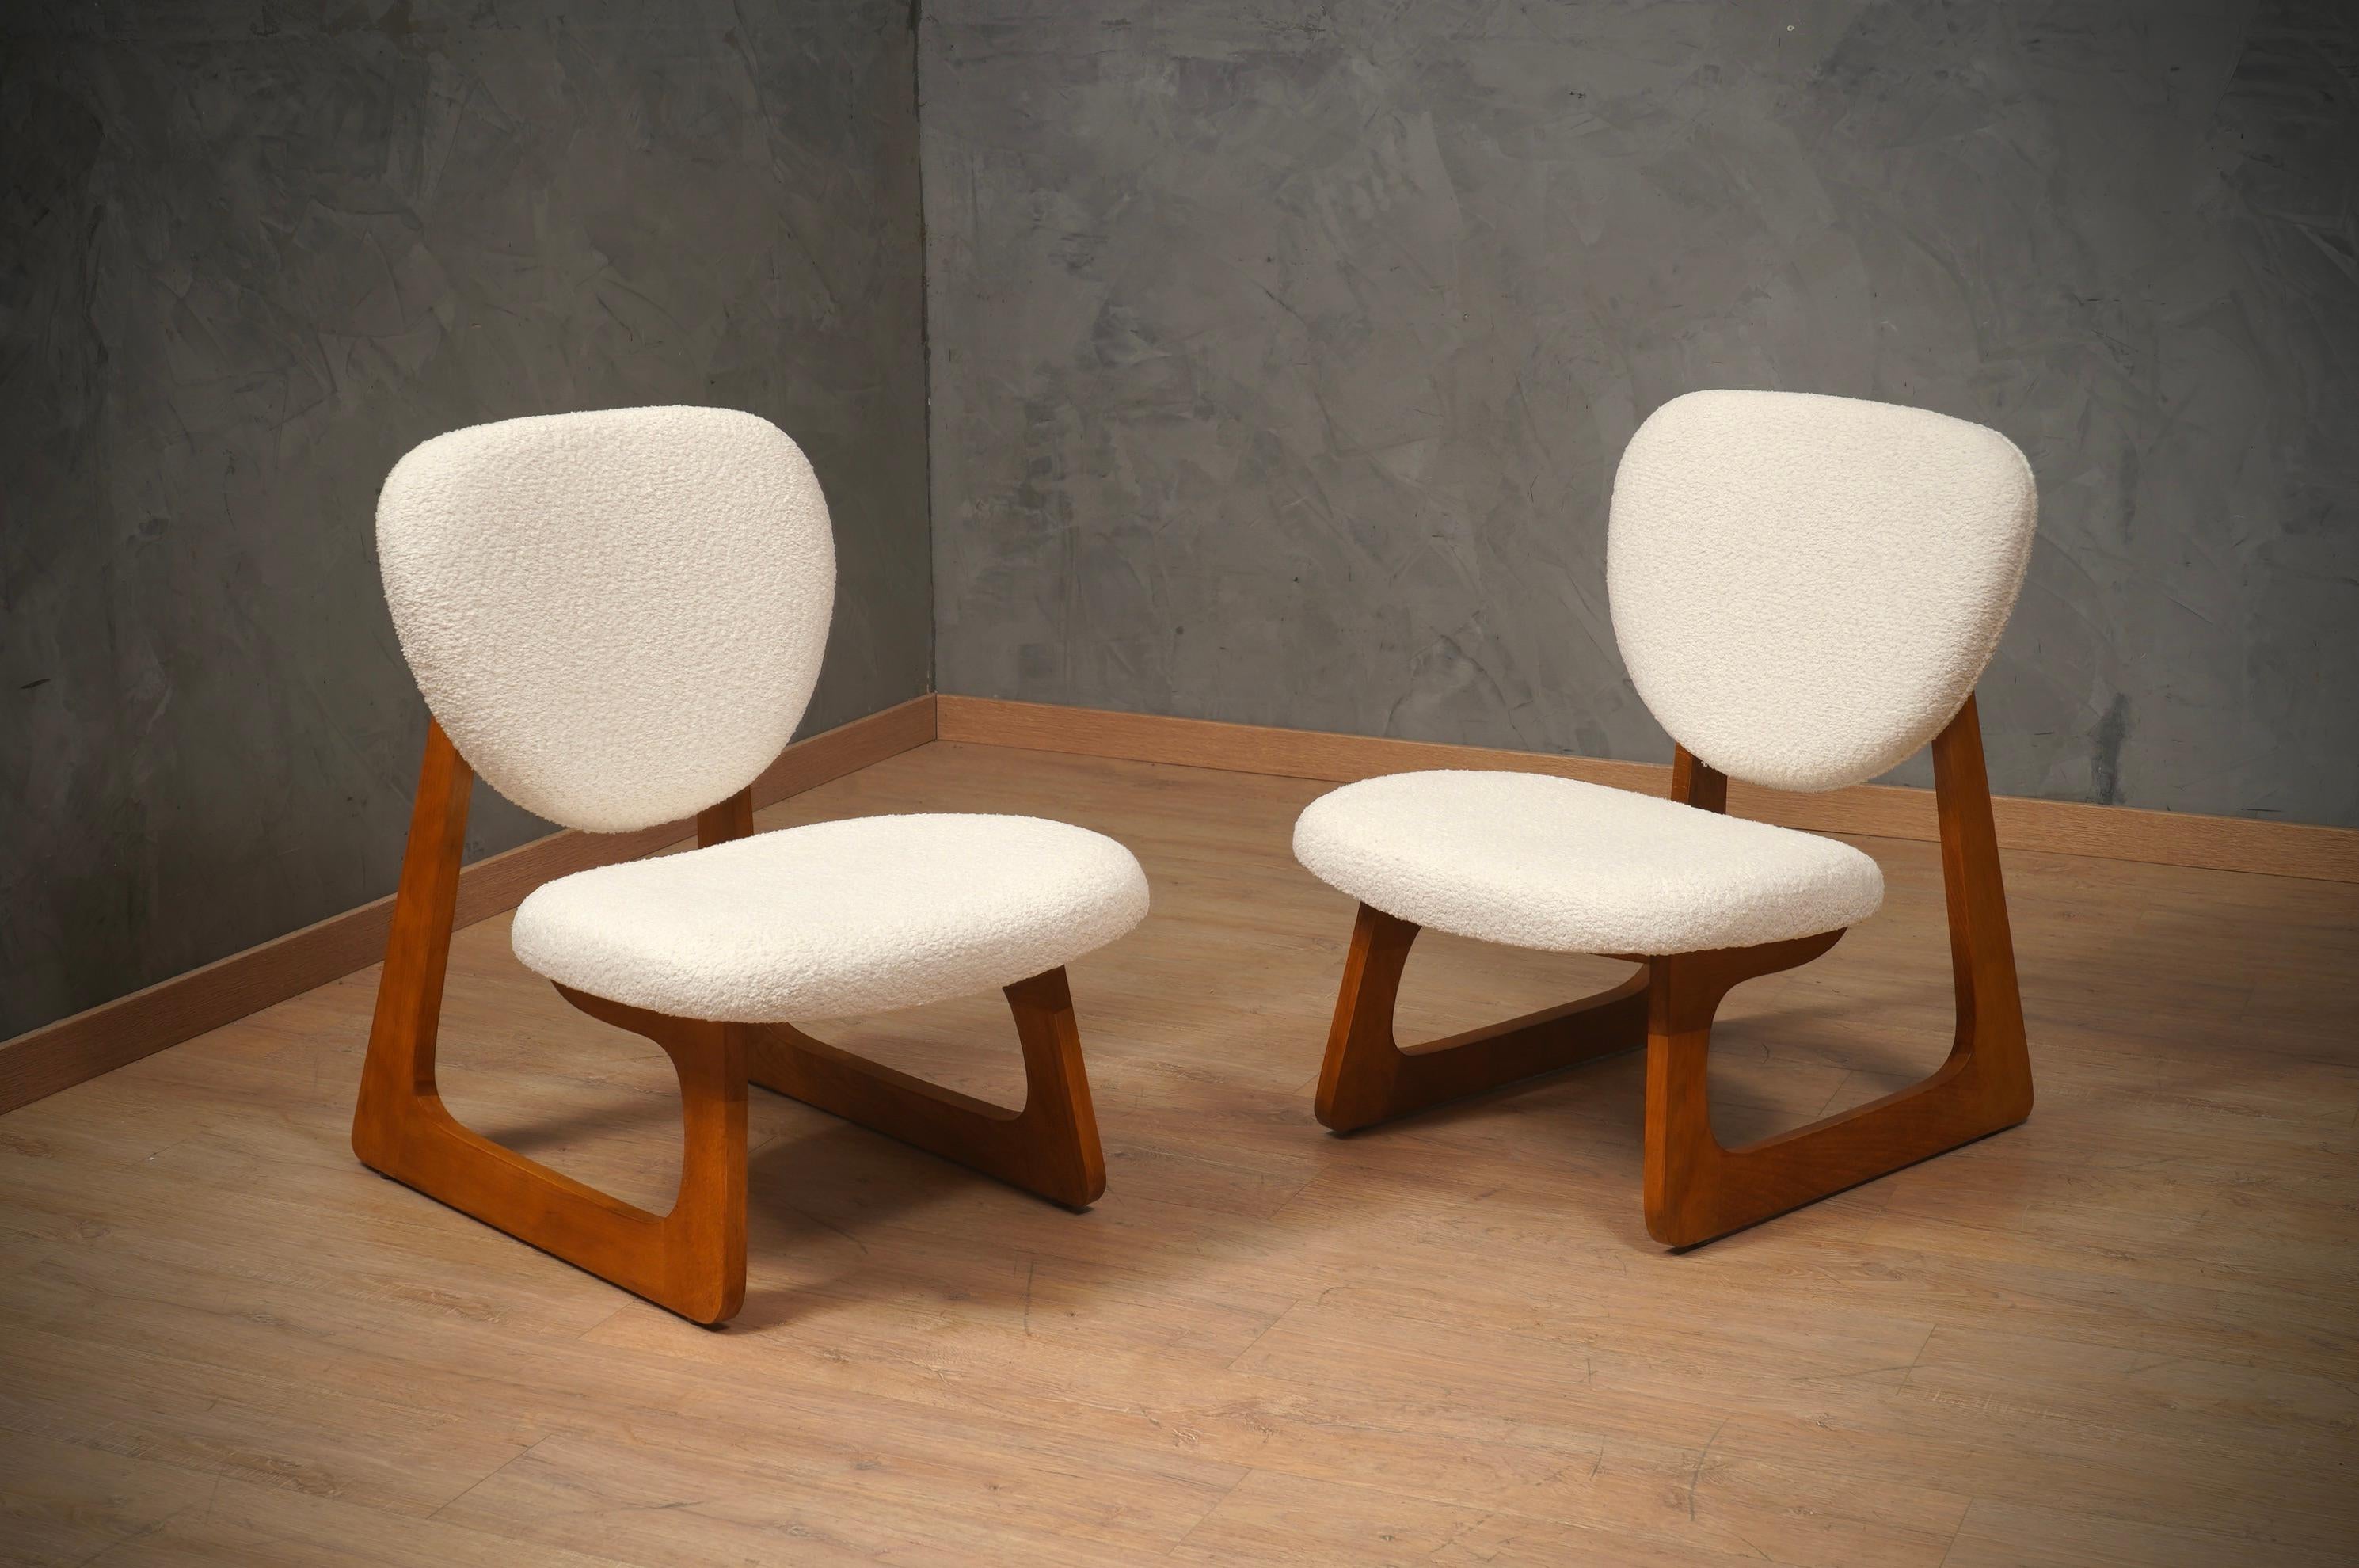 Fabric Adrian Pearsall per Craft Associates Mid-Century ArmChairs, 1980 For Sale